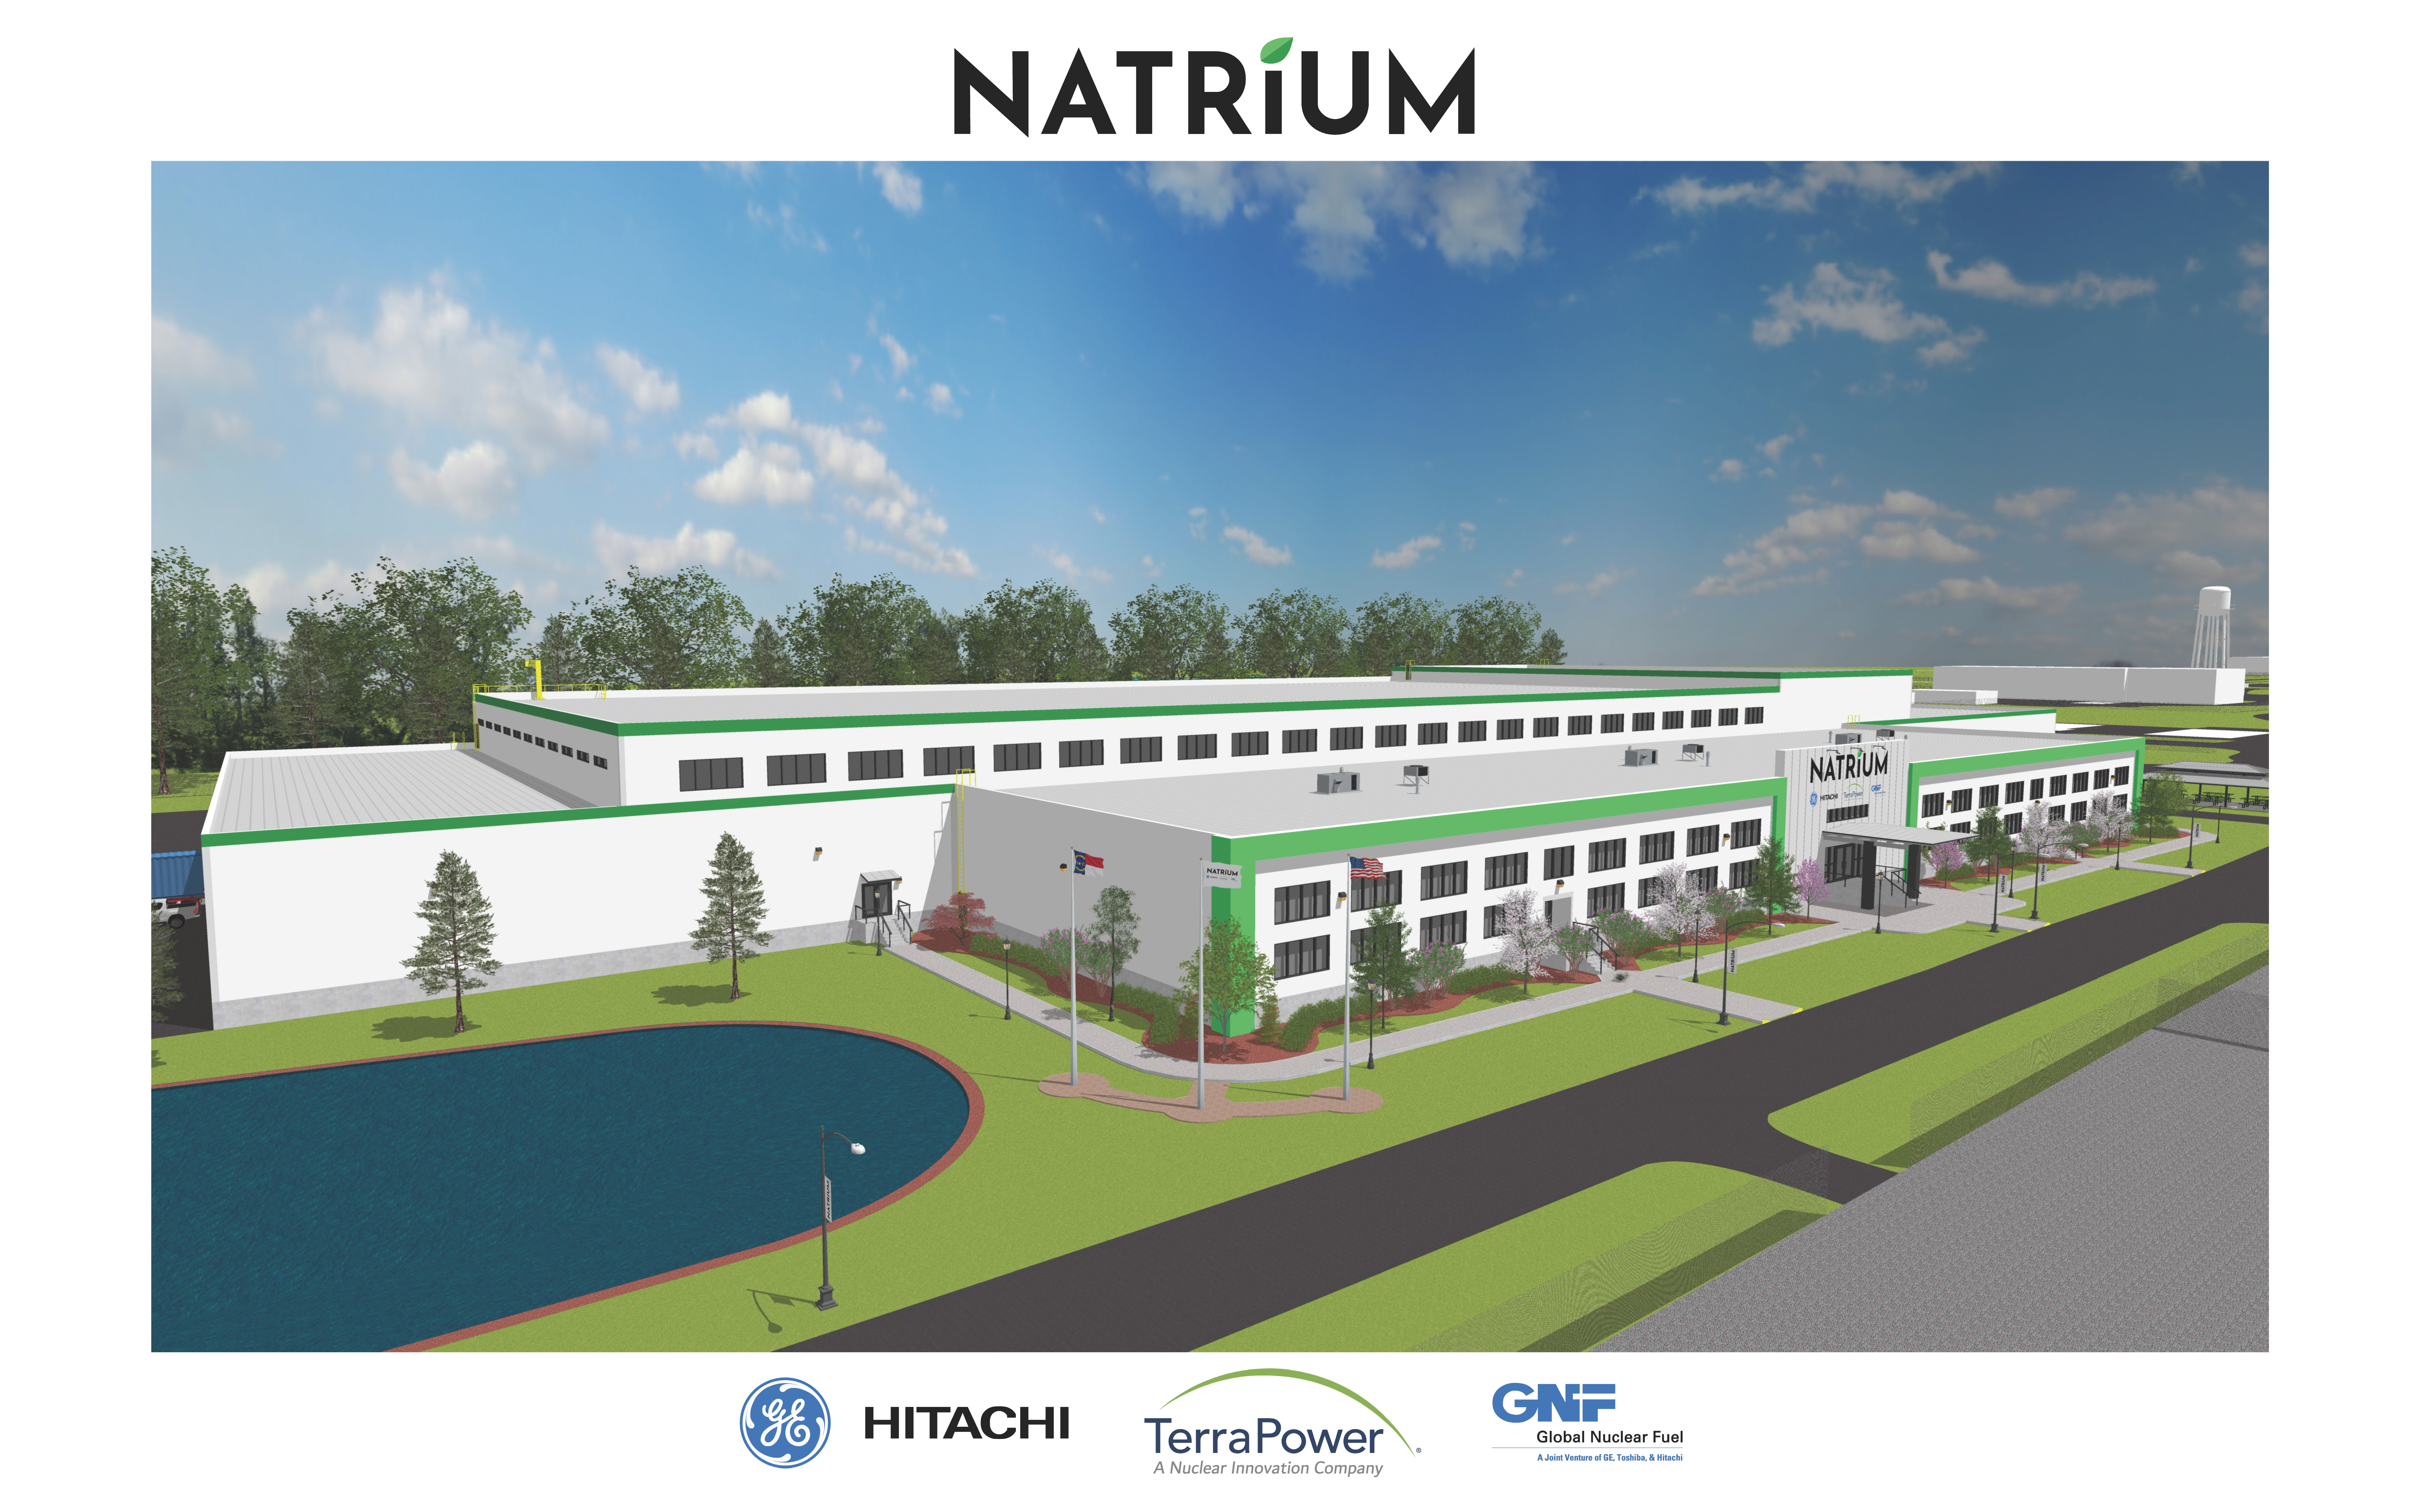 Global Nuclear Fuel and TerraPower Announce Natrium Fuel Facility